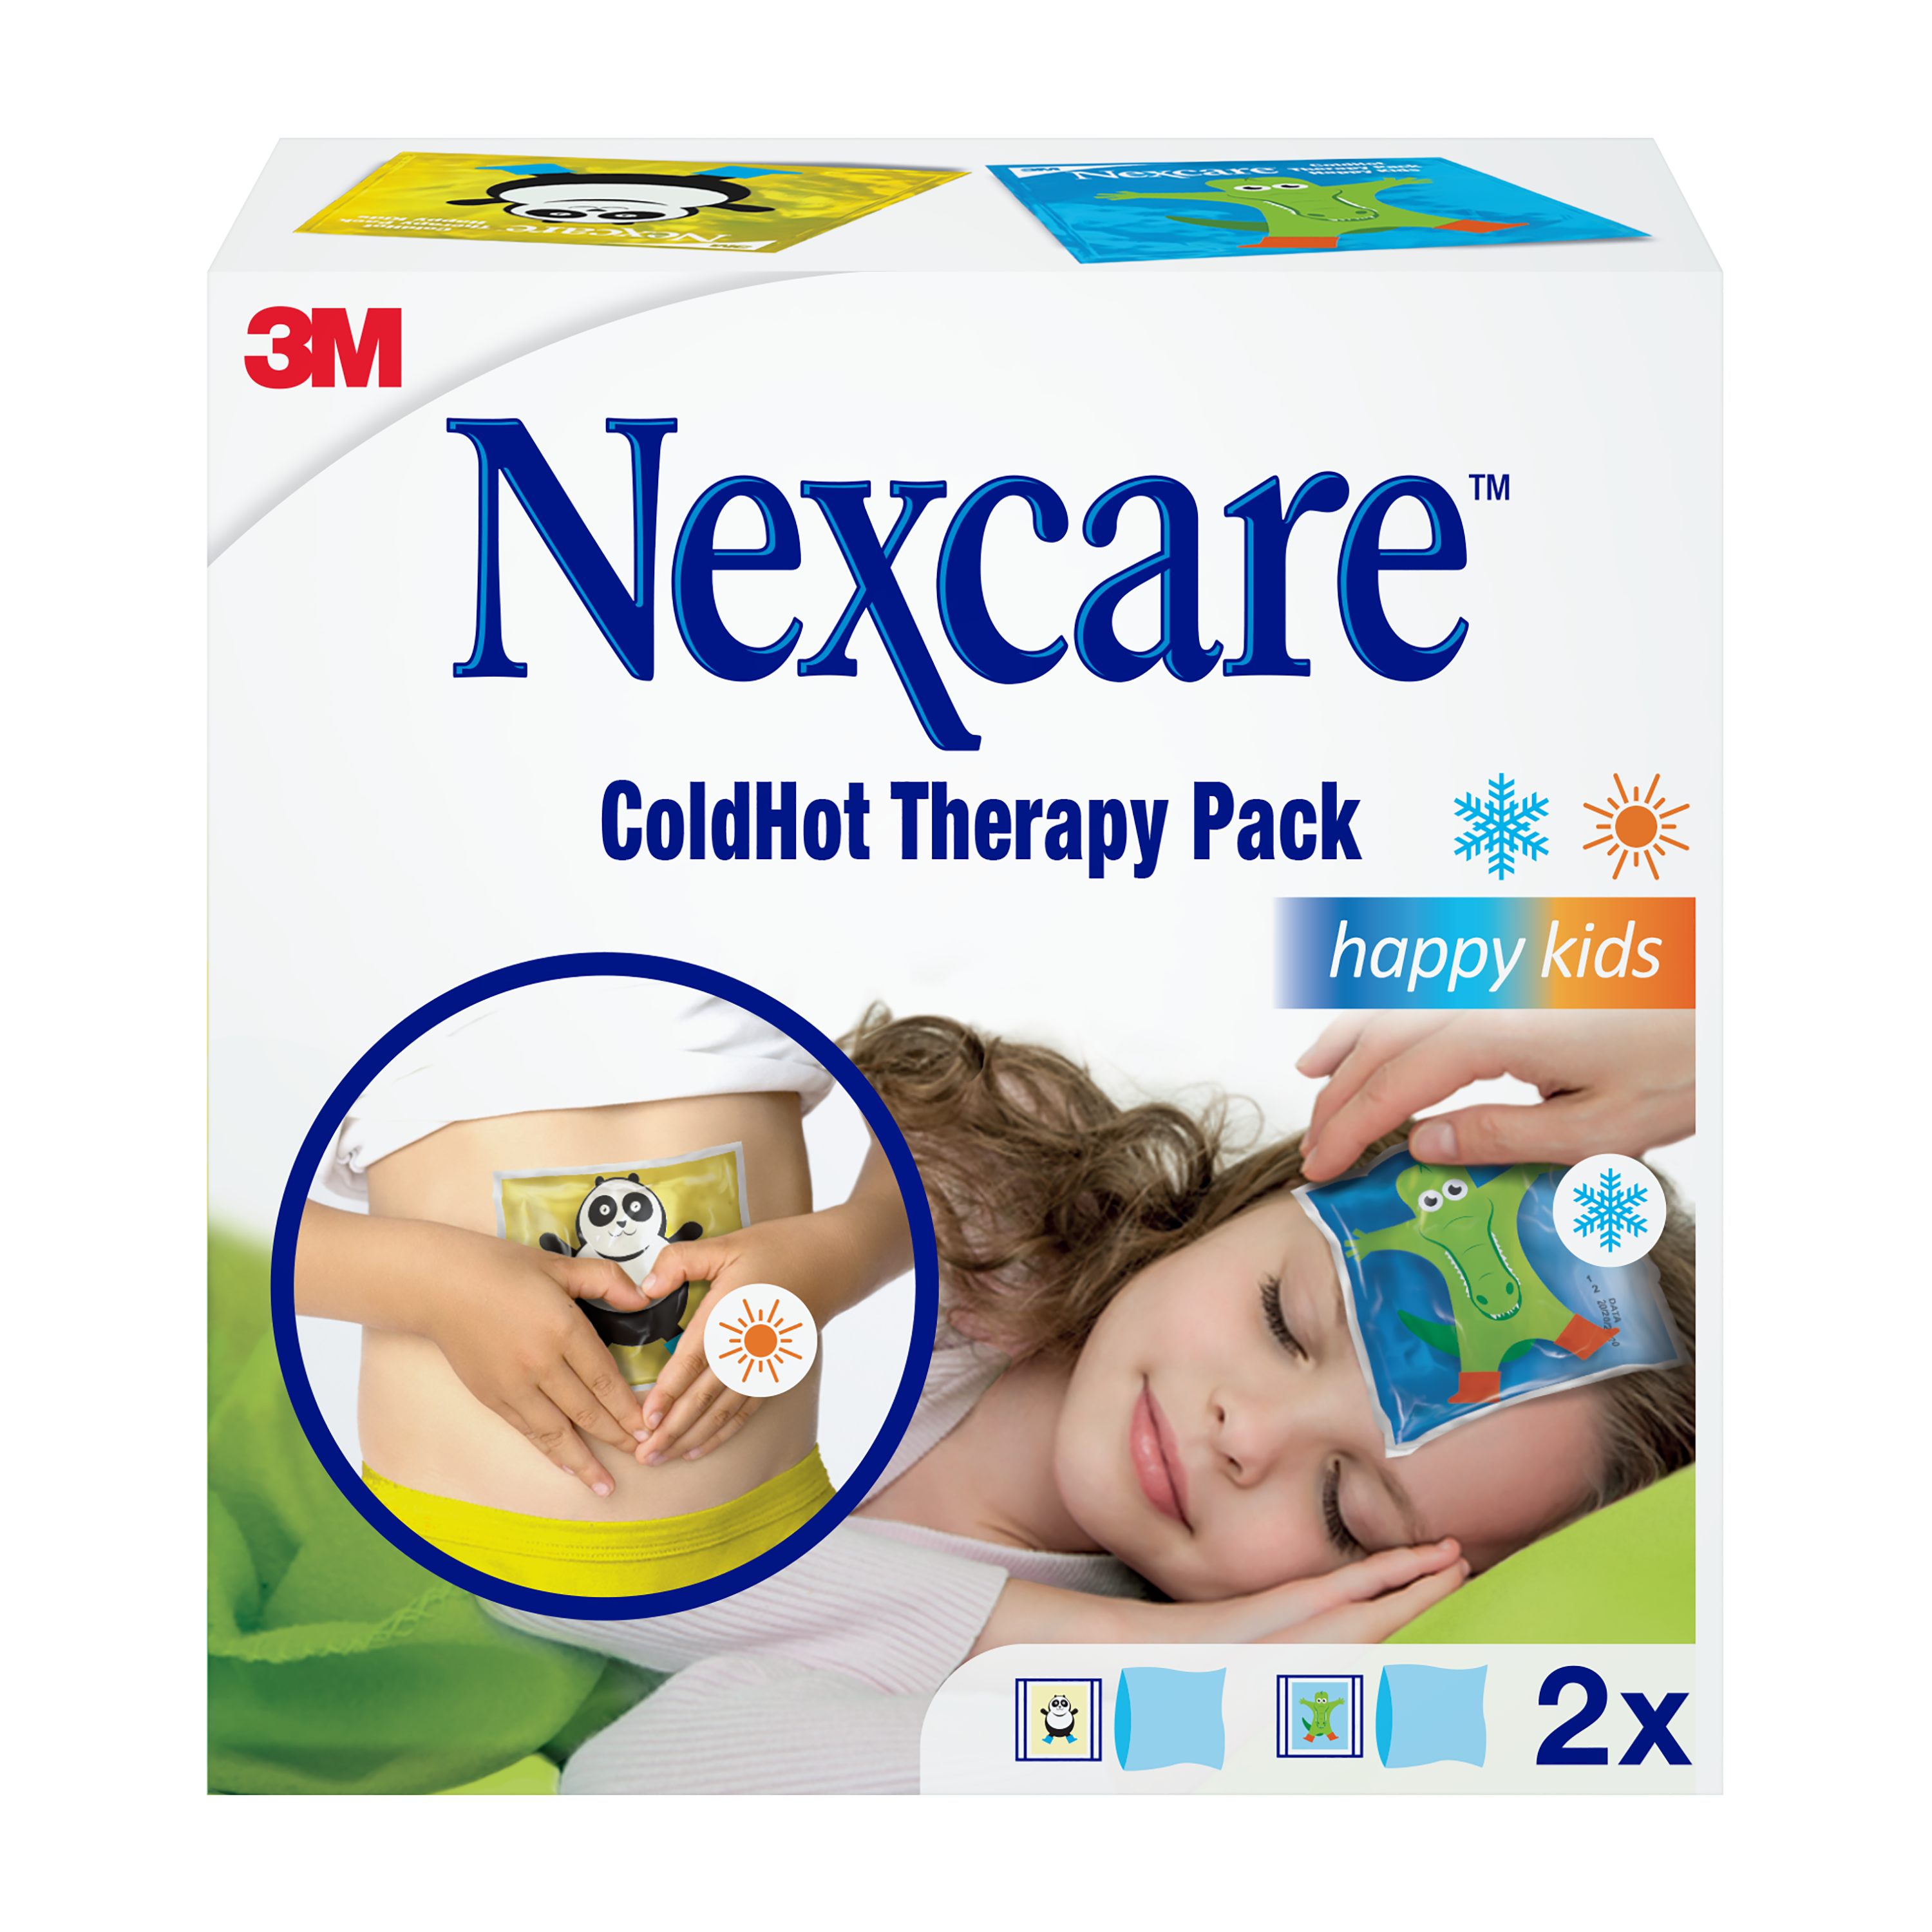 Nexcare™ ColdHot Therapy Pack Happy Kids, 12 cm x 11 cm, 2 Stk